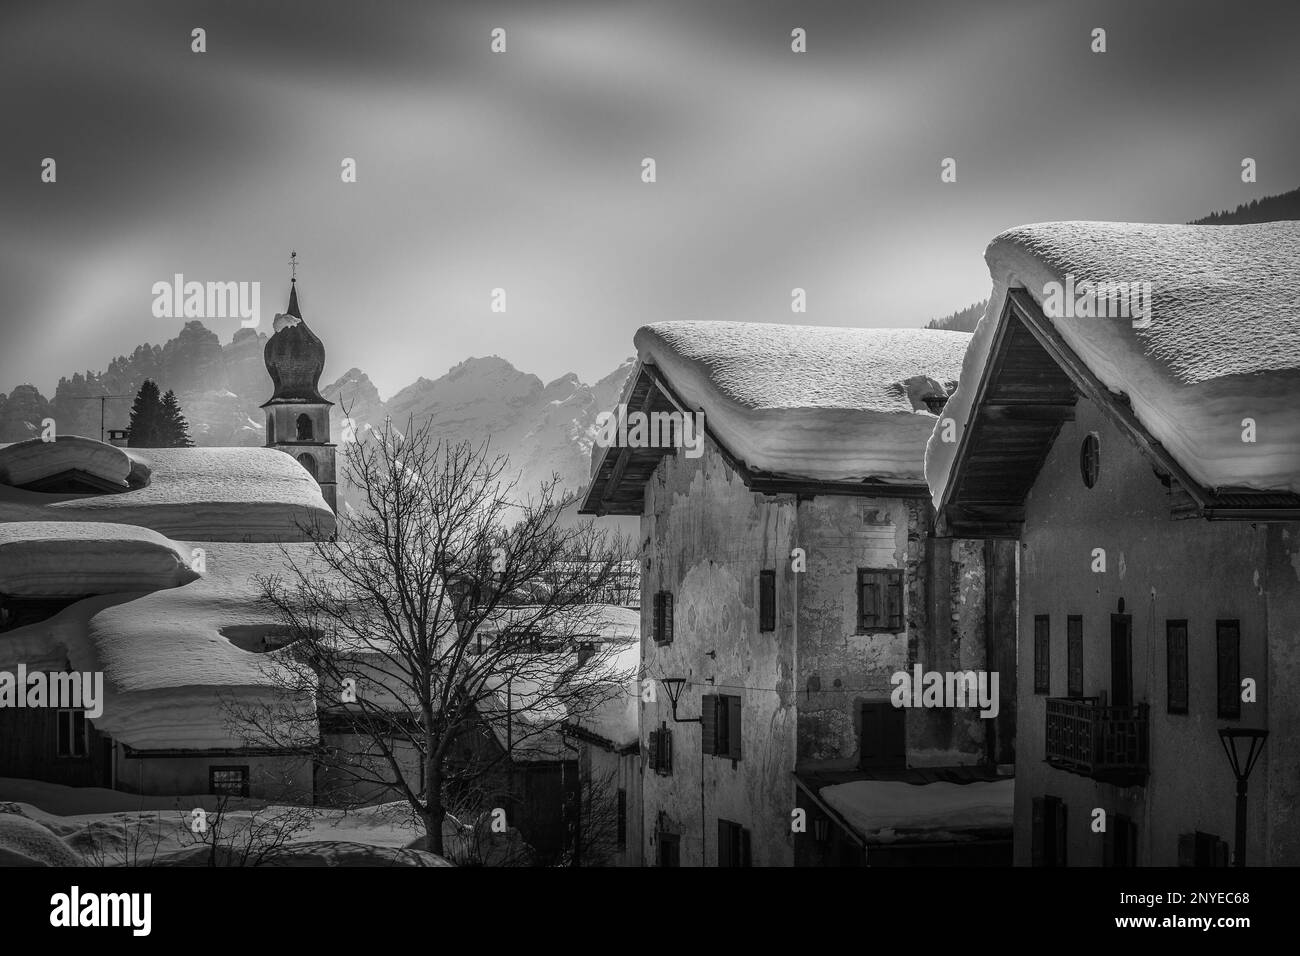 Black and white view of houses in small Dolomite village with snow-covered roofs Stock Photo